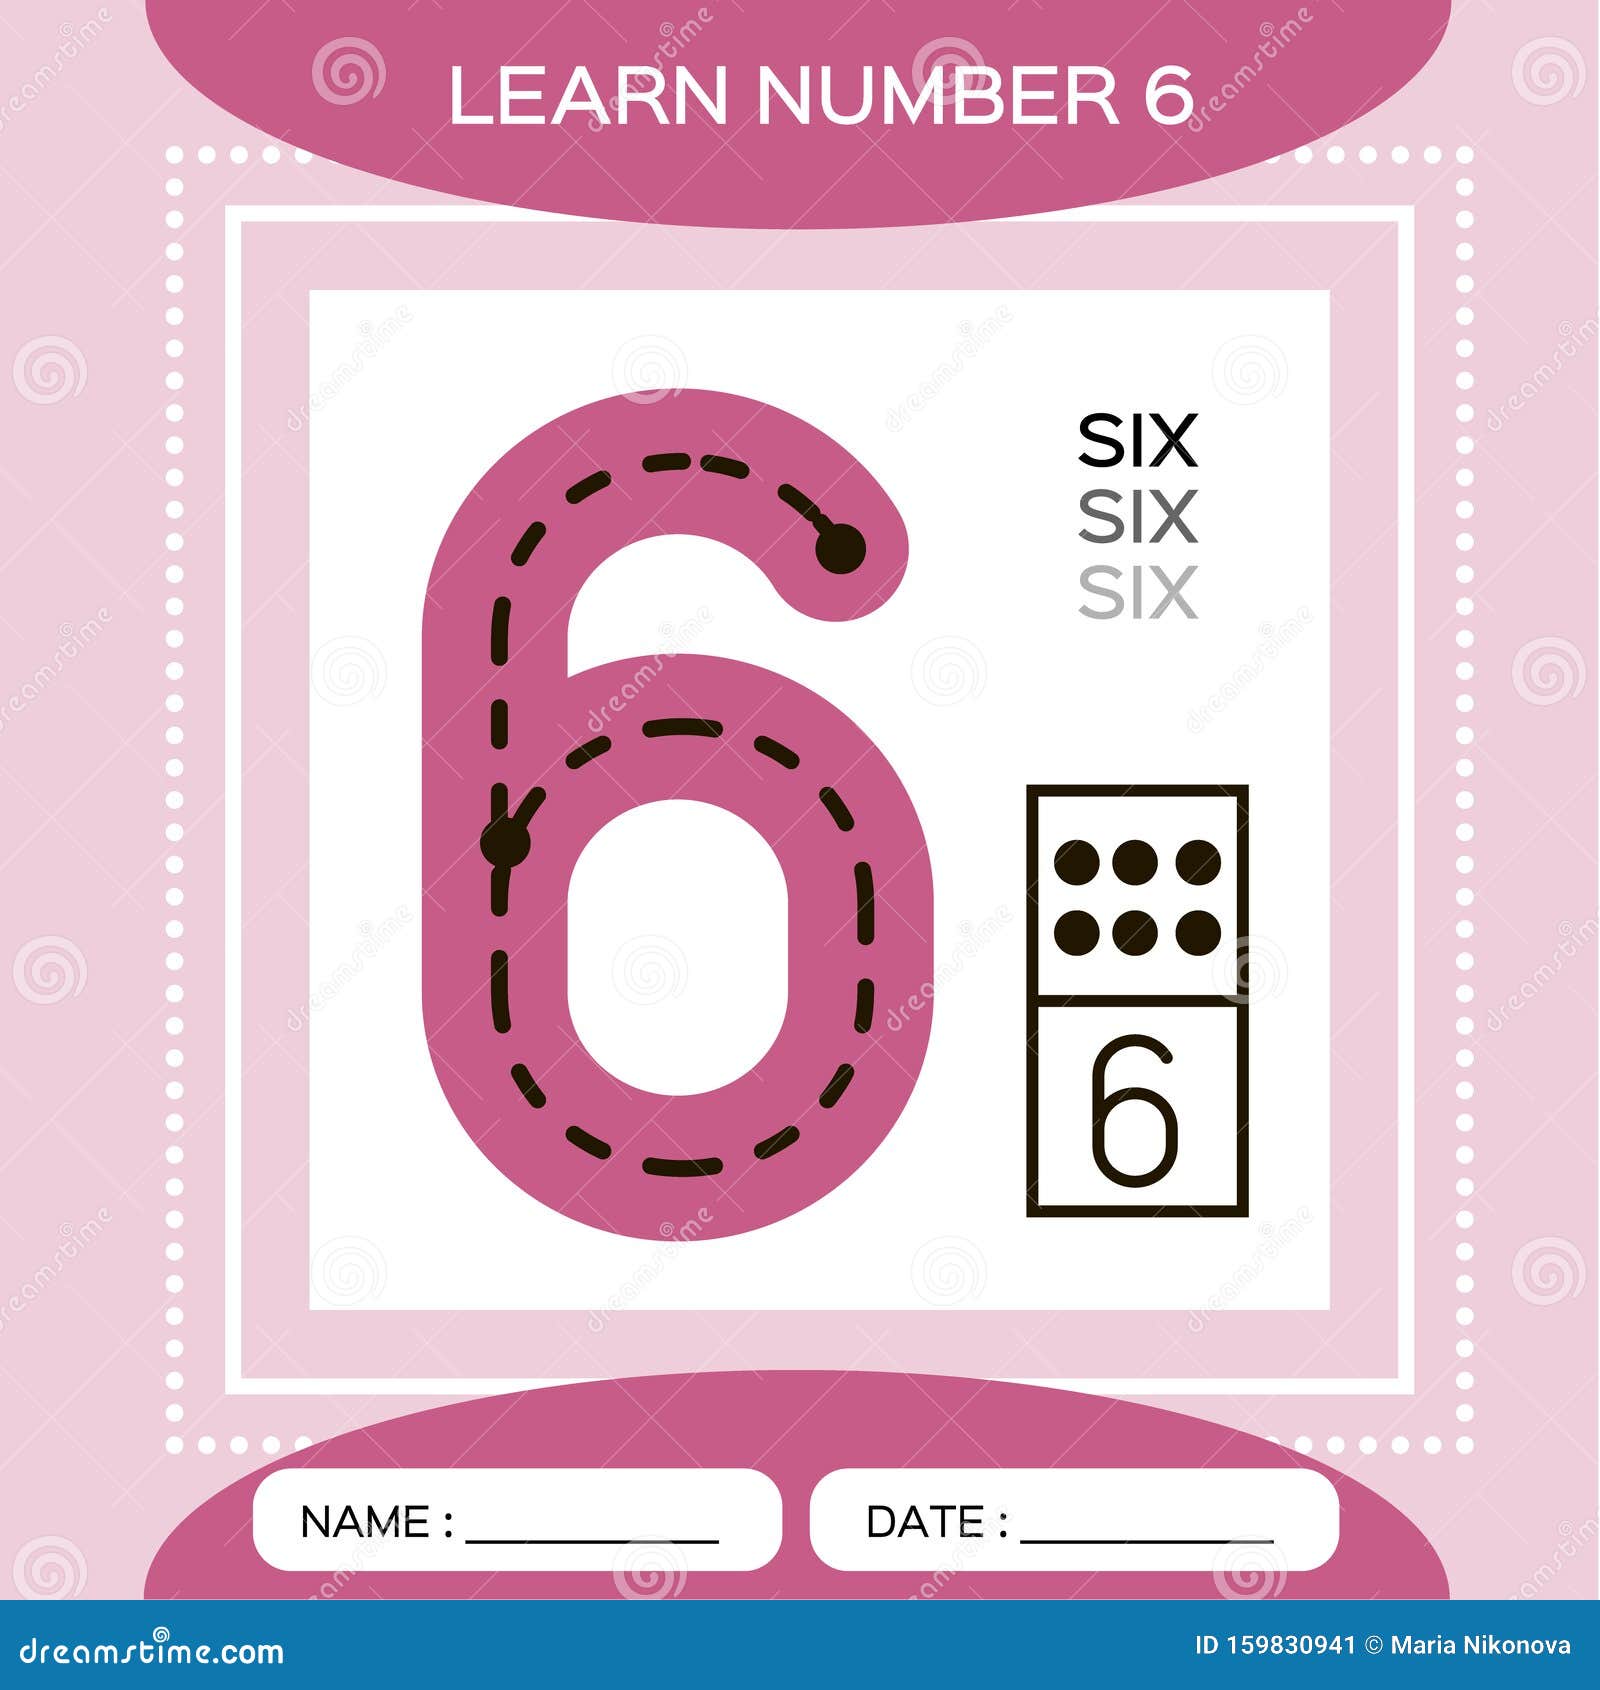 Learn Numbers 23. Six . Children Educational Game. Kids Learning